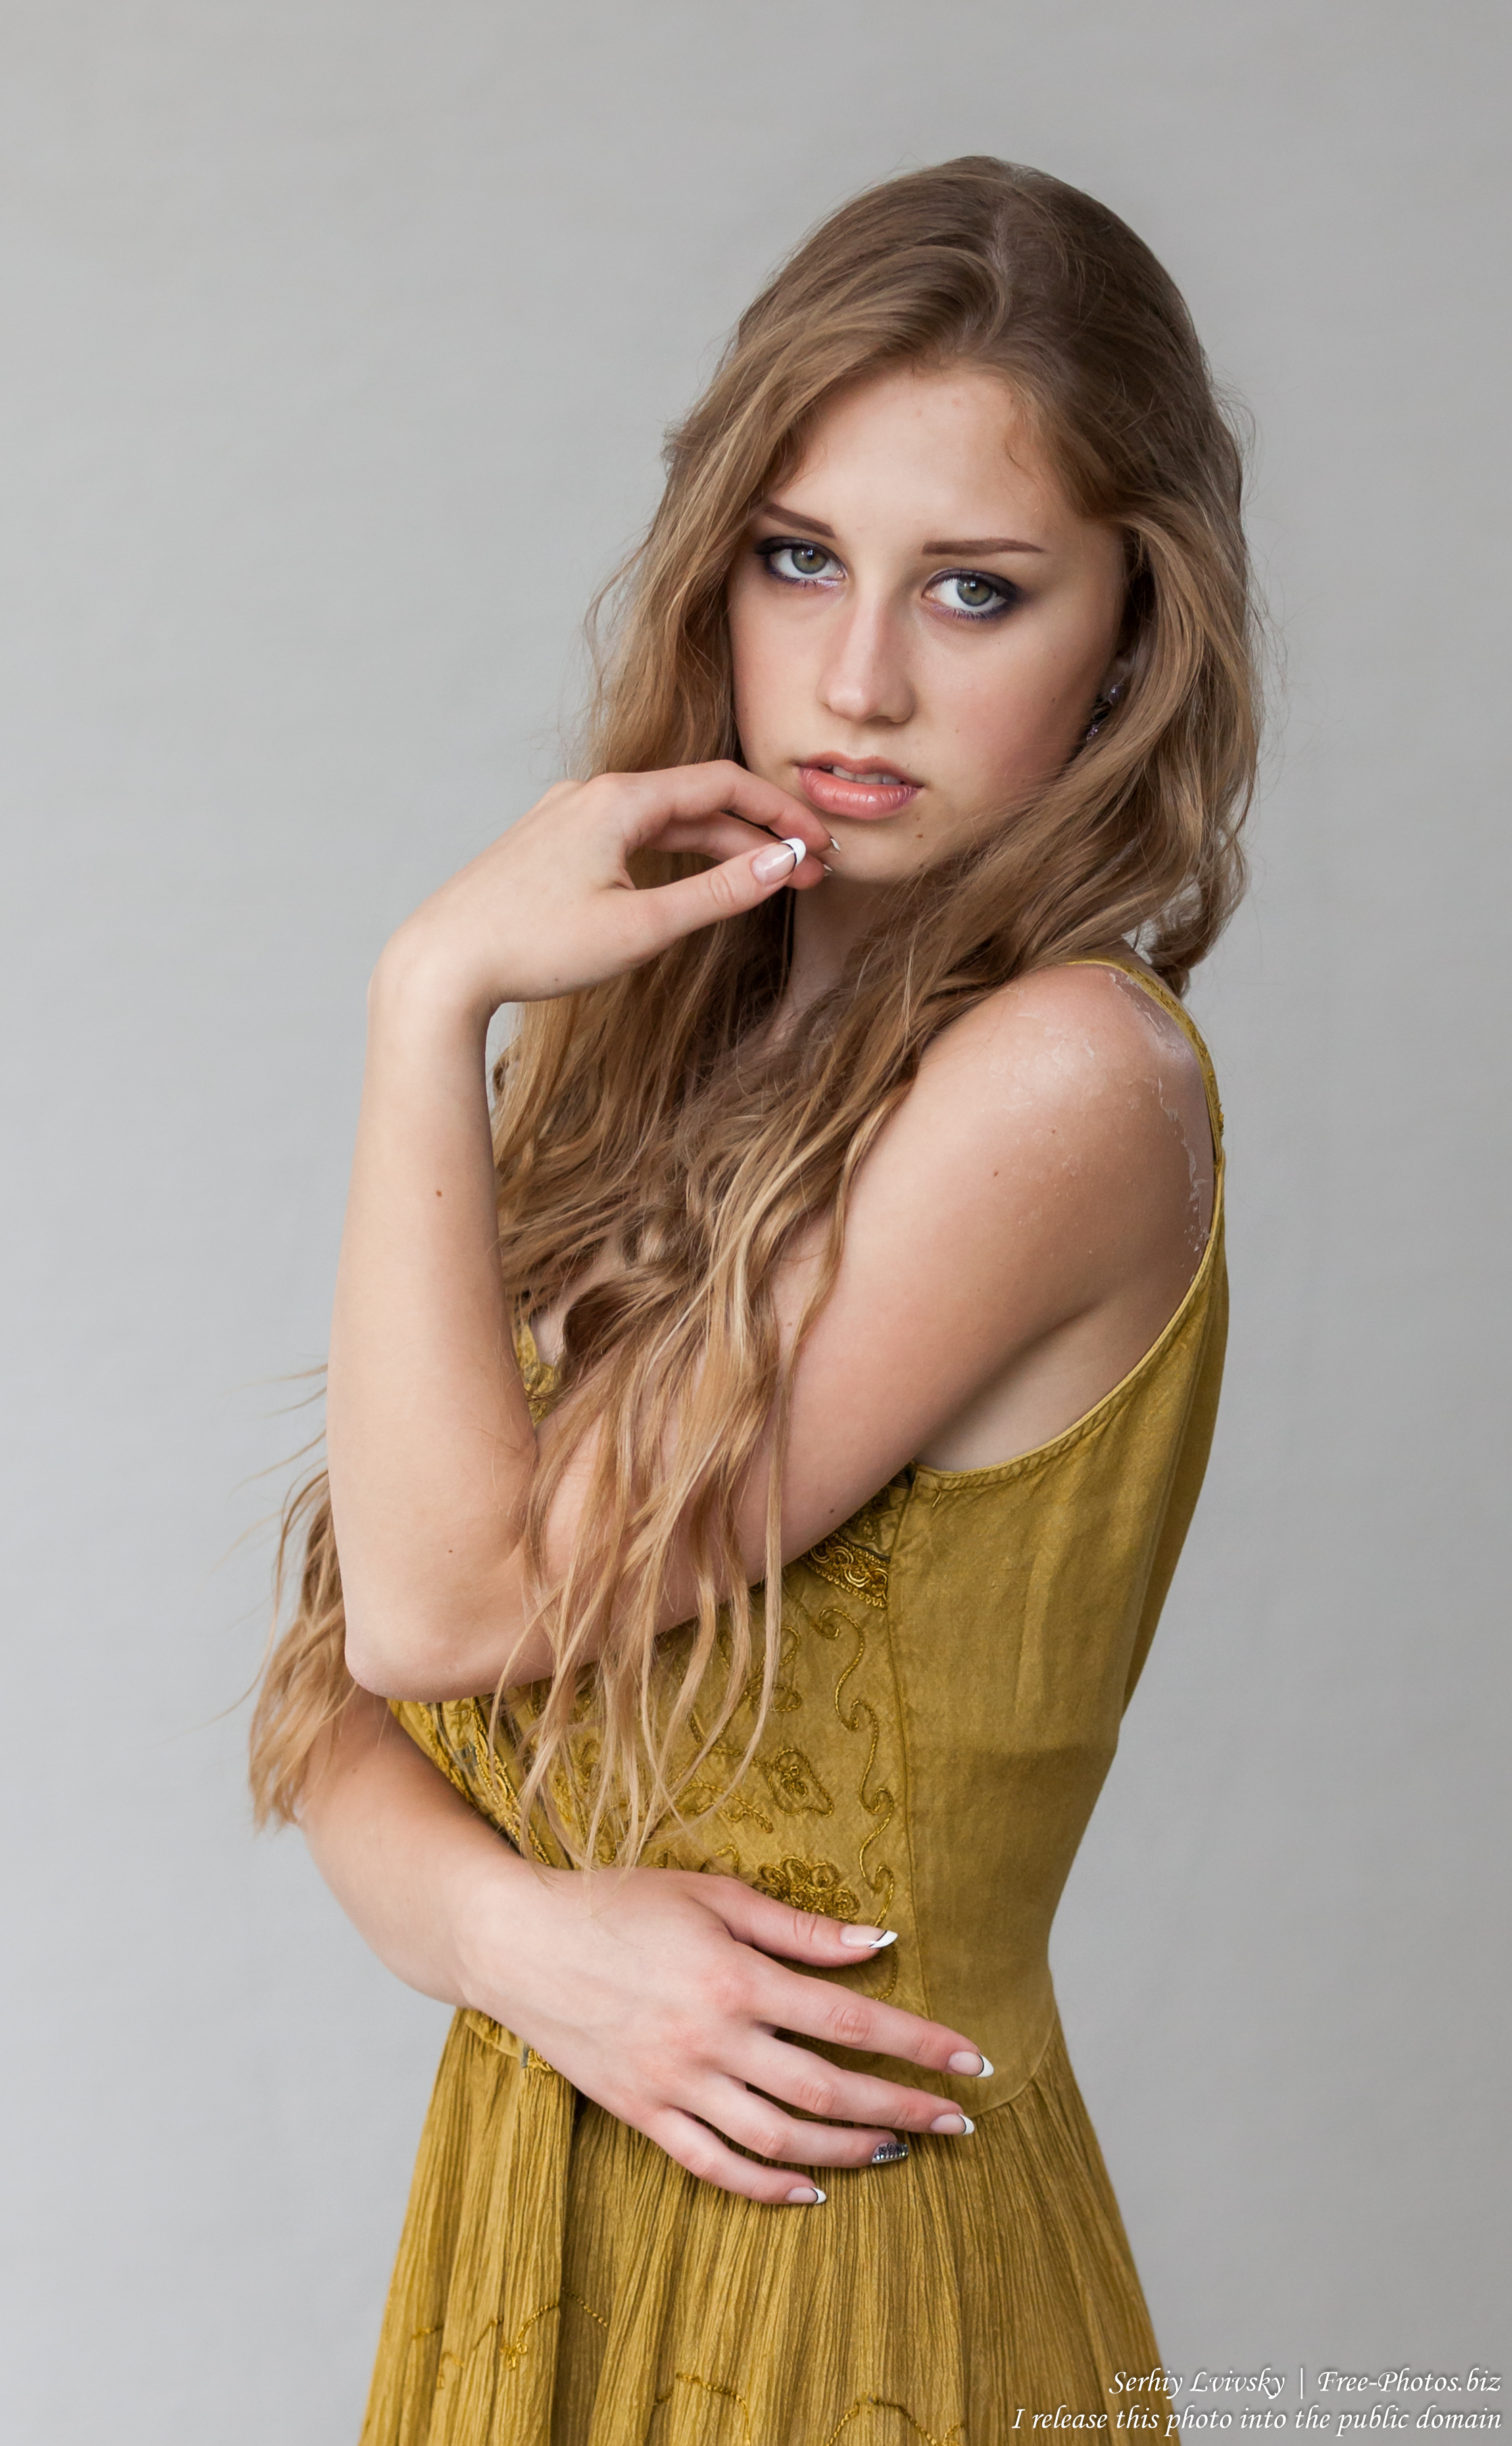 a 16-year-old natural blond girl photographed by Serhiy Lvivsky in July 2016, picture 22